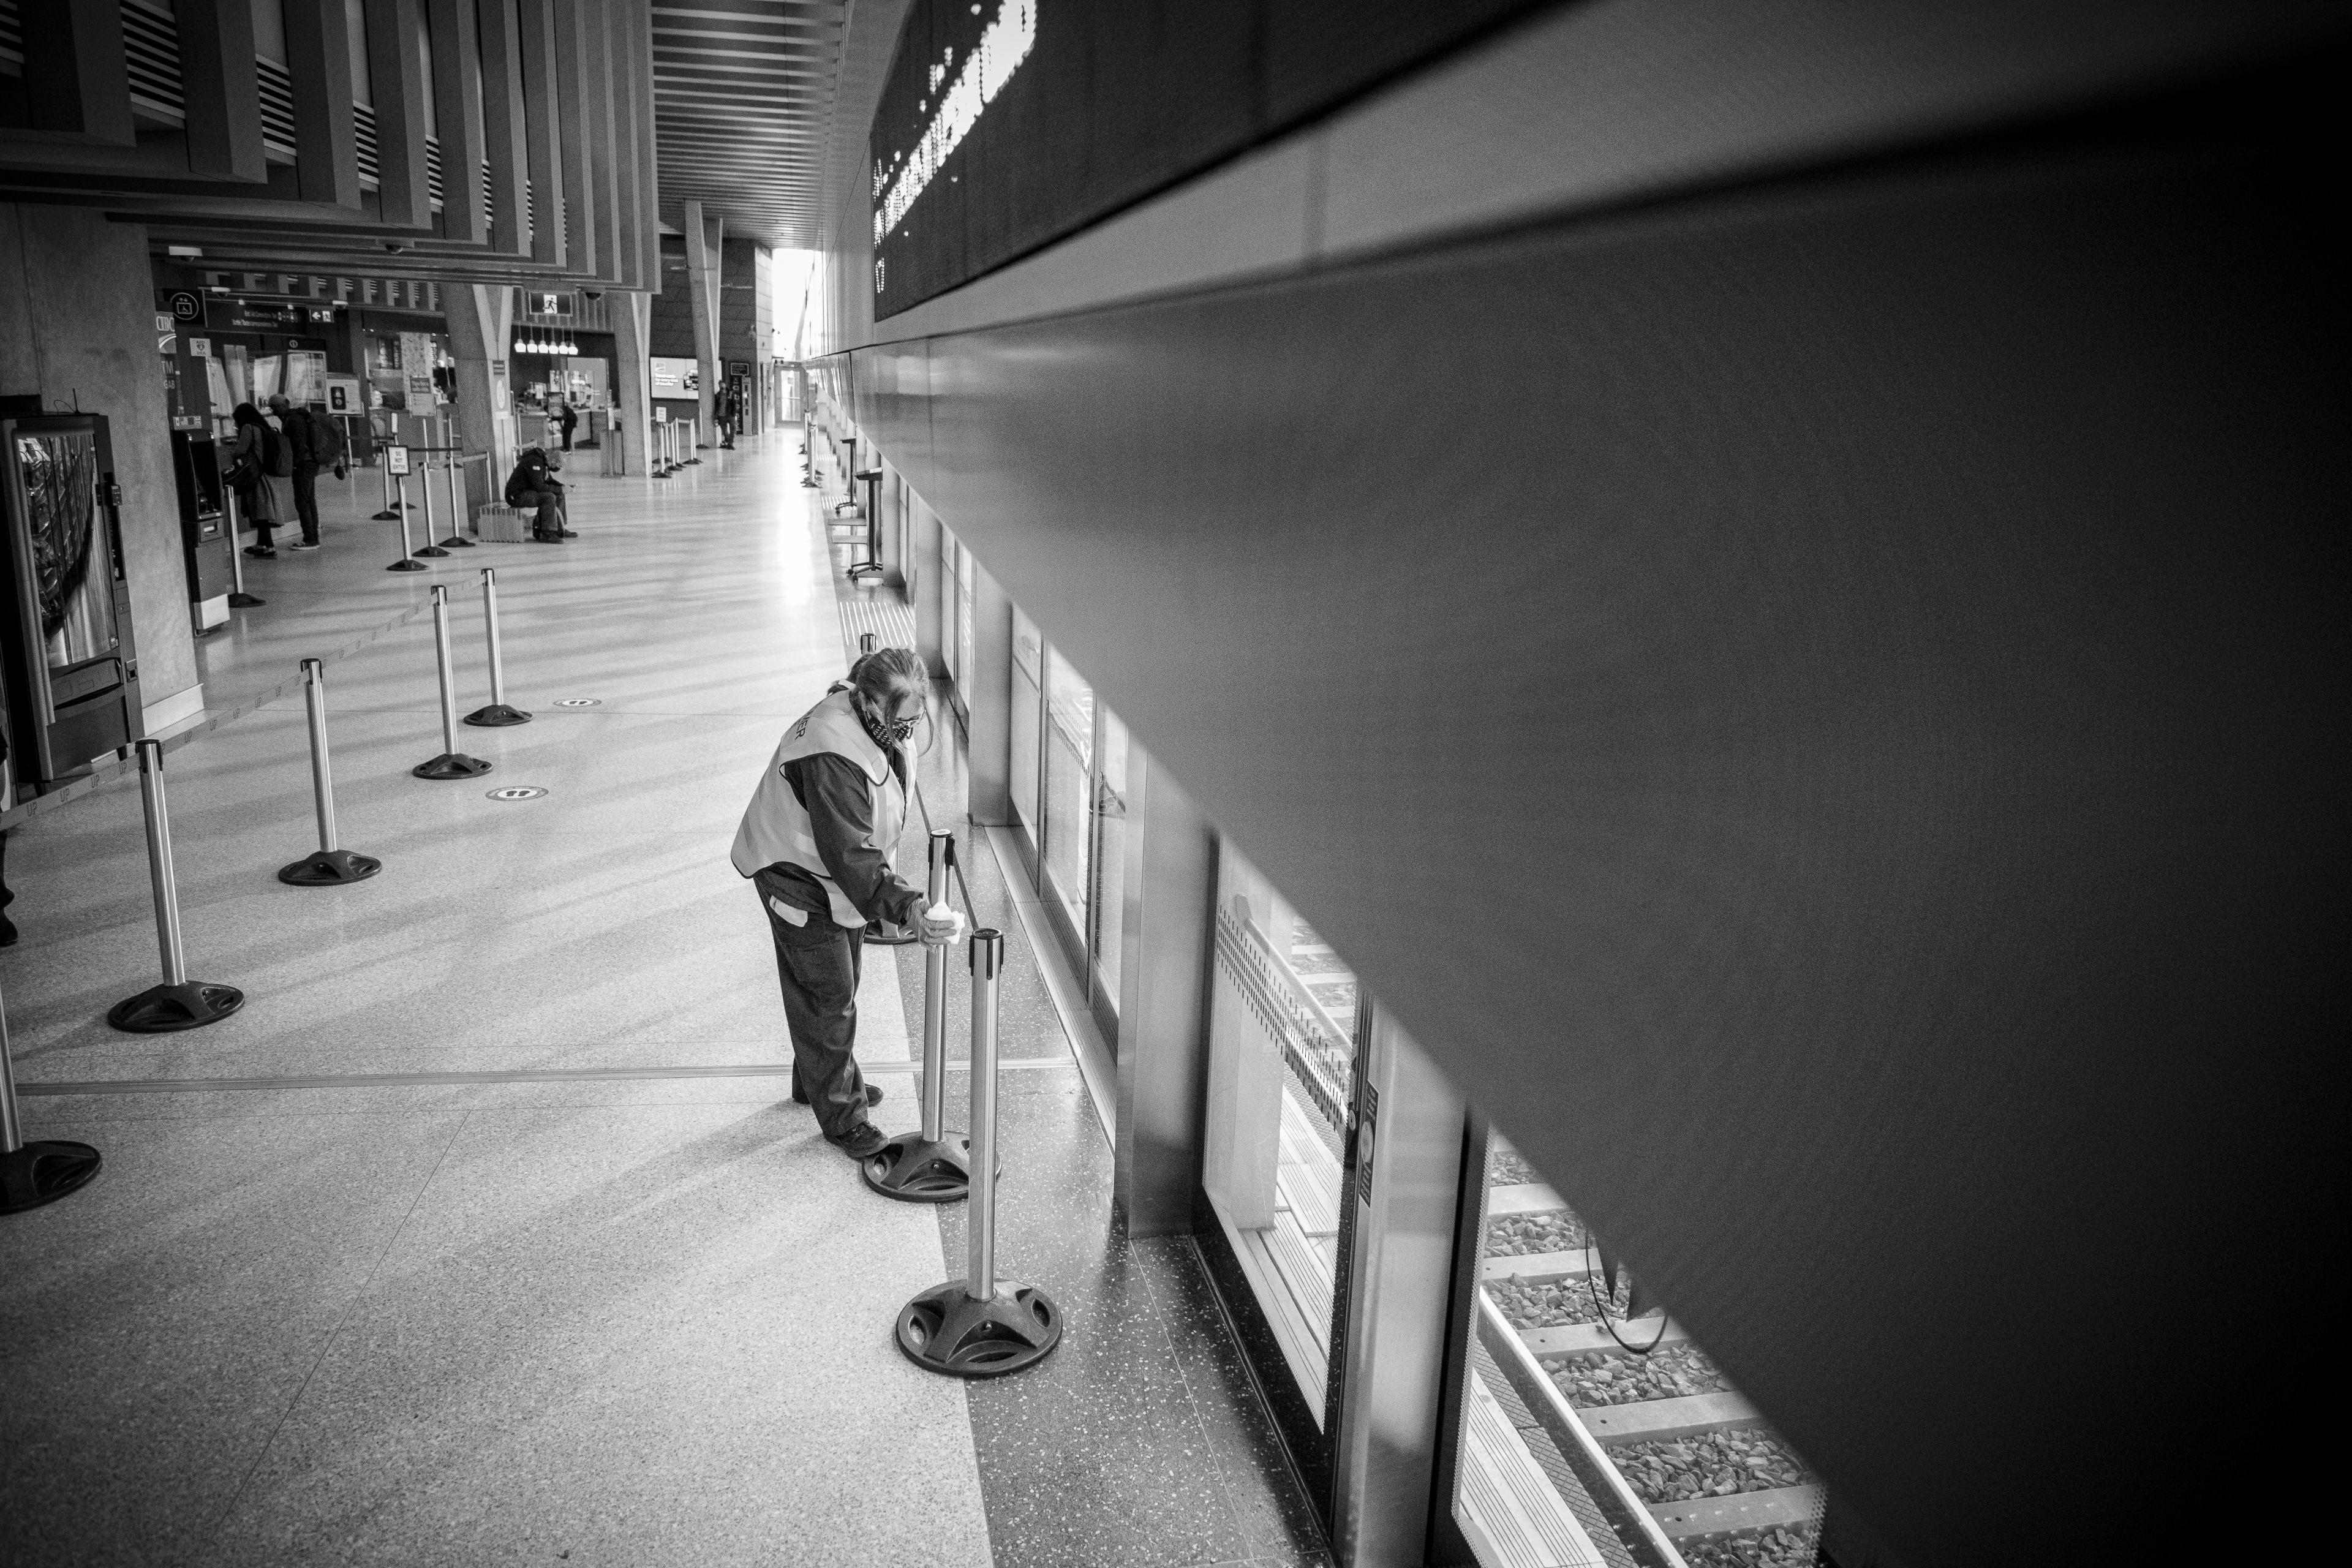 A worker cleans on the UP platform.